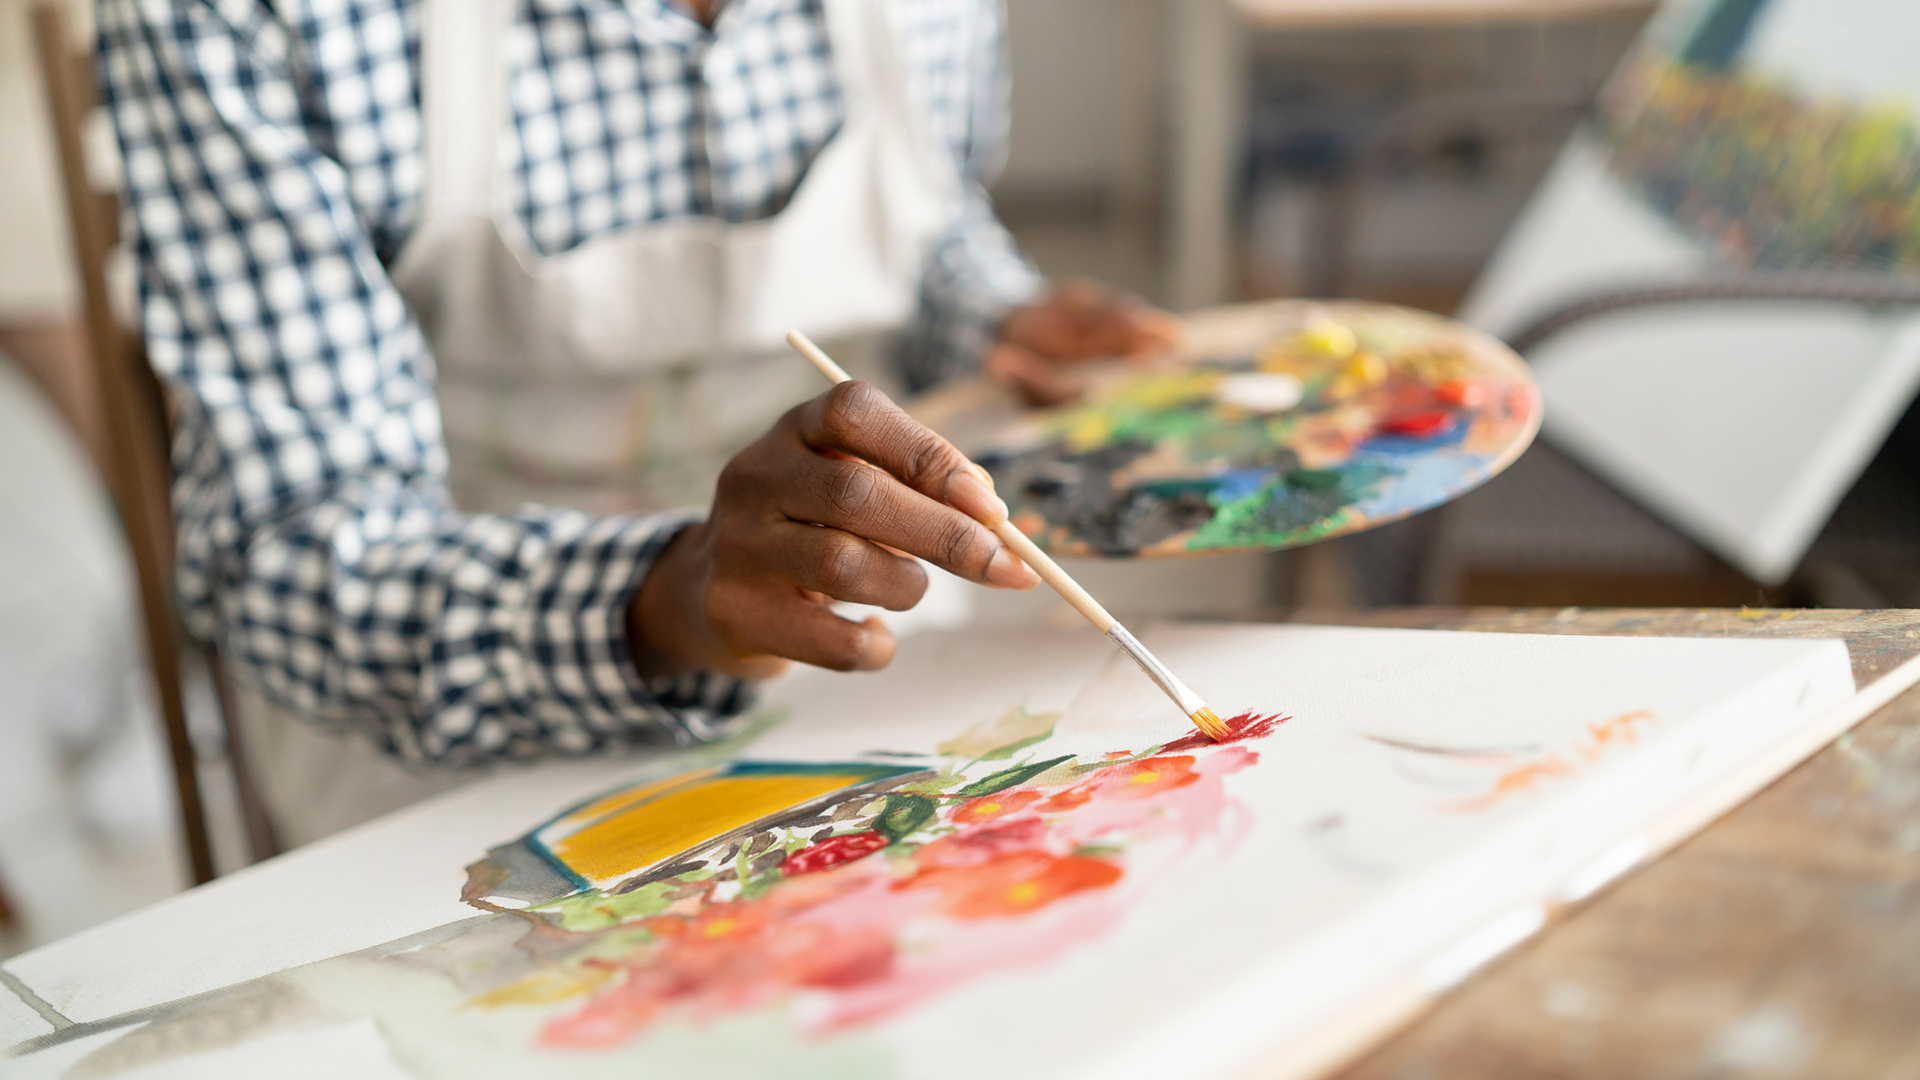 How Being Creative Makes Us Appreciate God